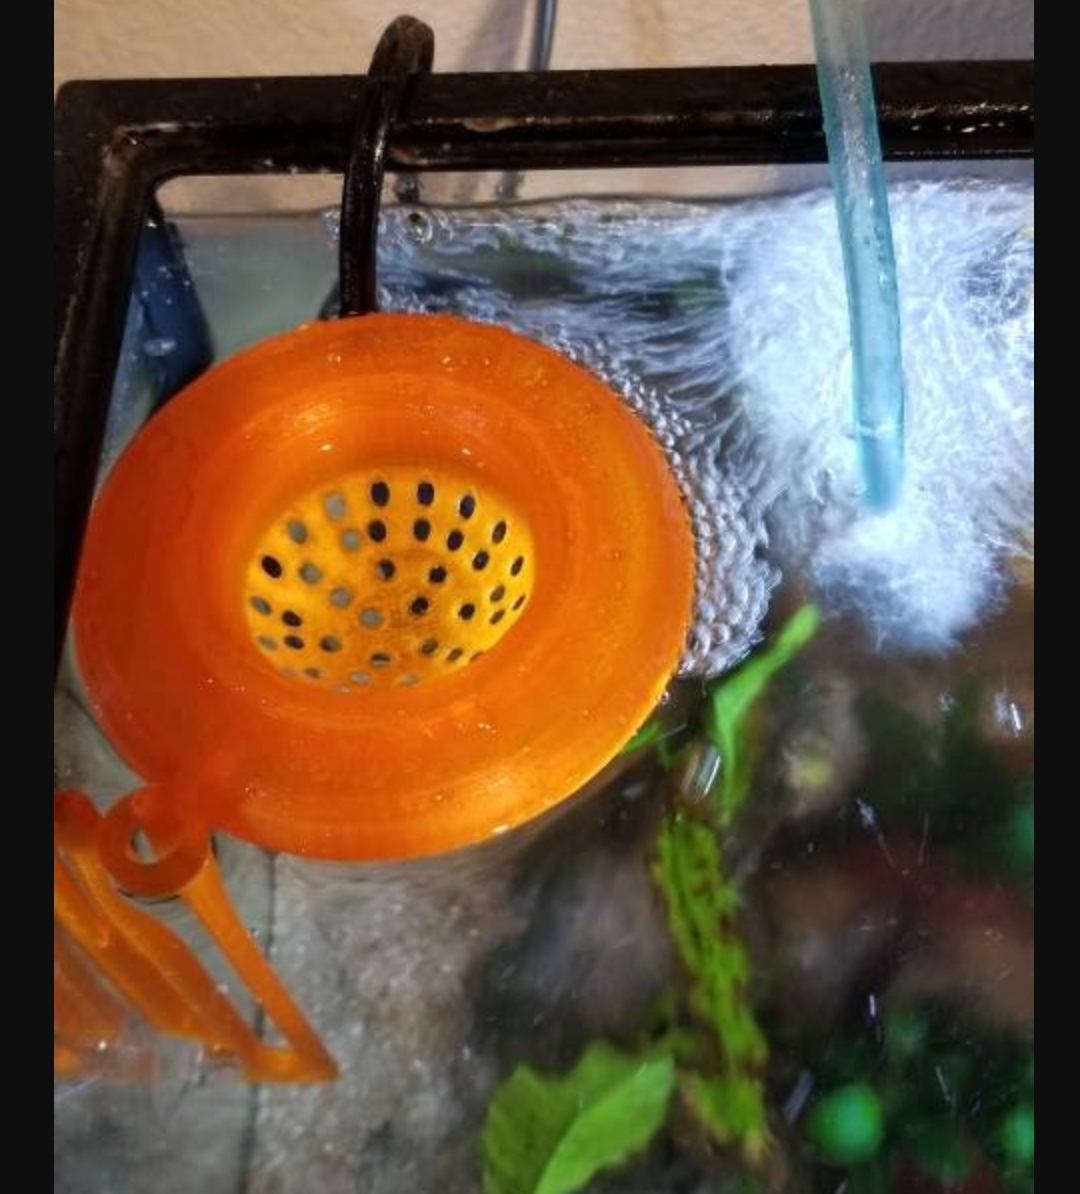 Floating Water Change Diffuser & Top Off Diffuser - Aquarium Safe 3D Printed ABS Plastic